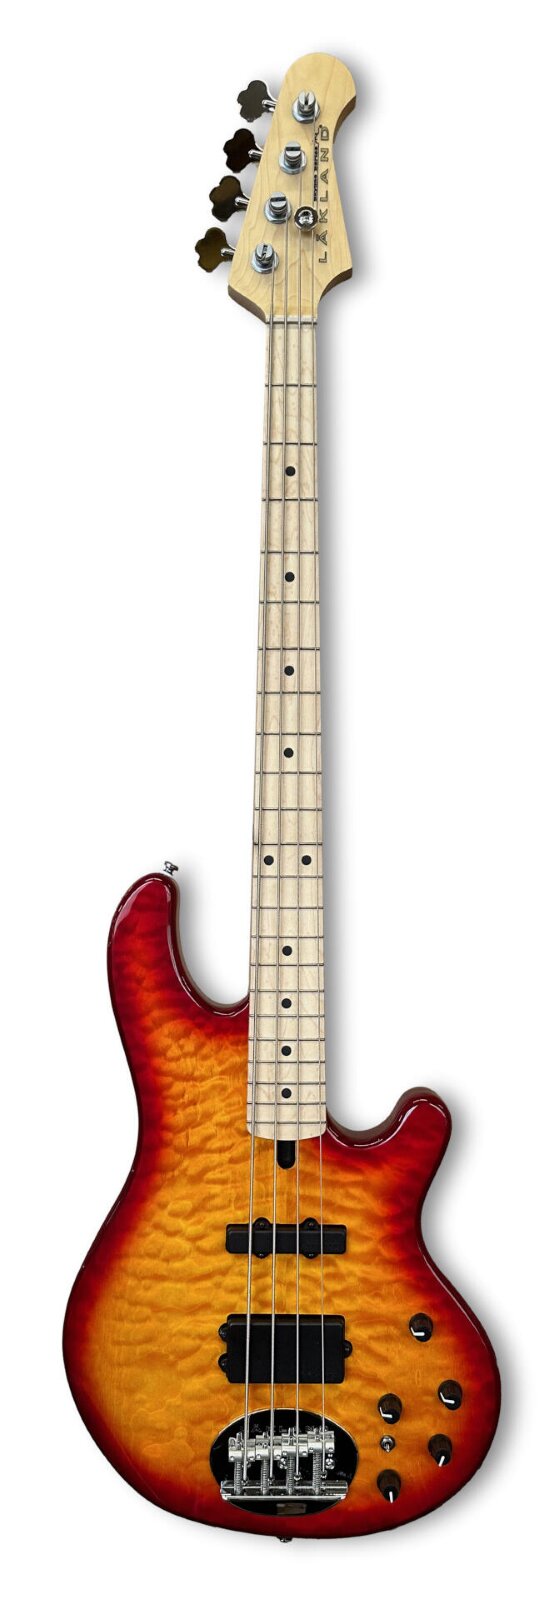 LAKLAND Skyline 44-02 Deluxe Bass, 4-String - Quilted Maple Top, Cherry Sunburst Gloss : photo 1